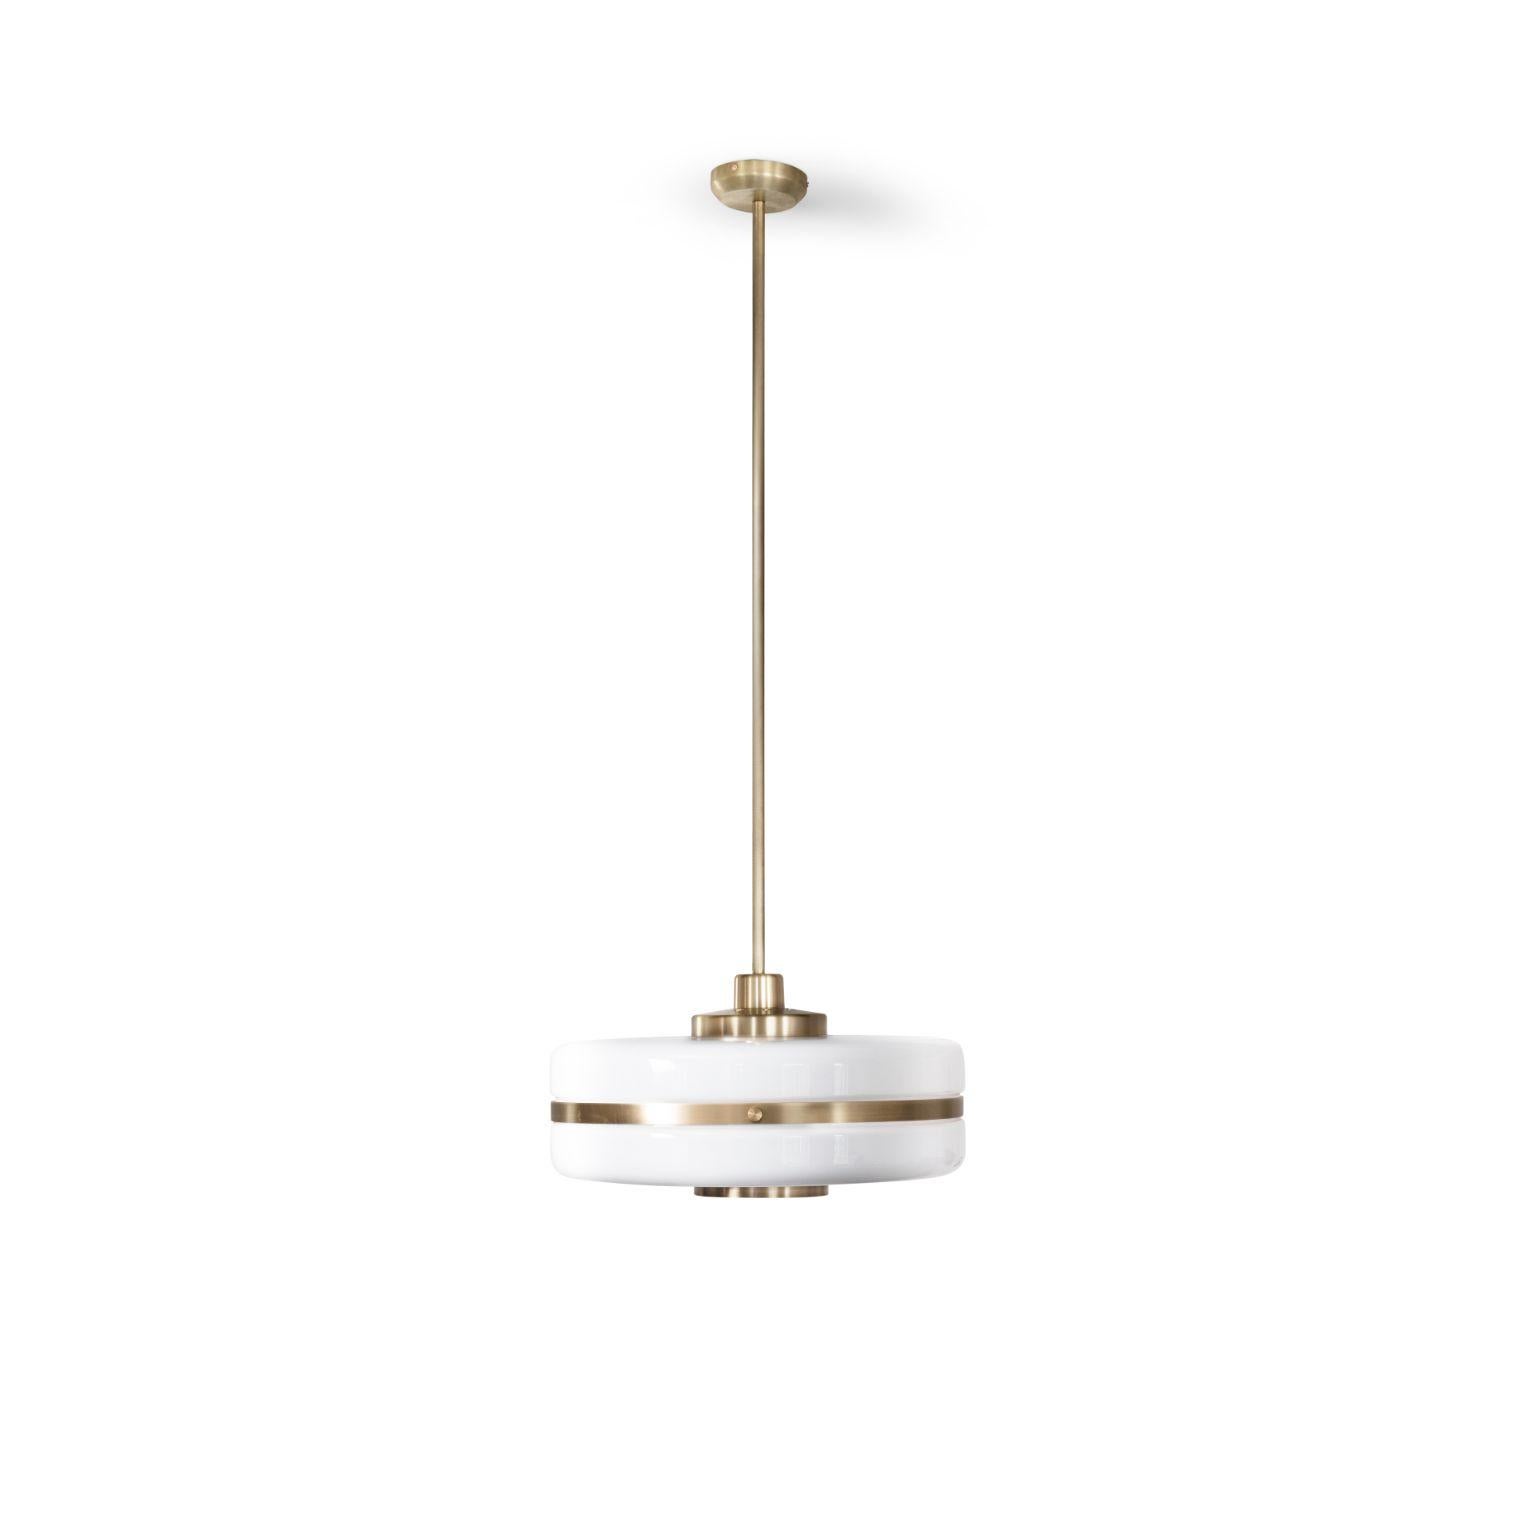 Masina pendant light by Bert Frank
Dimensions: 22 (only lamp) x 40 cm
Materials: Brass, glass

When Adam Yeats and Robbie Llewellyn founded Bert Frank in 2013 it was a meeting of minds and the start of a collaborative creative partnership with